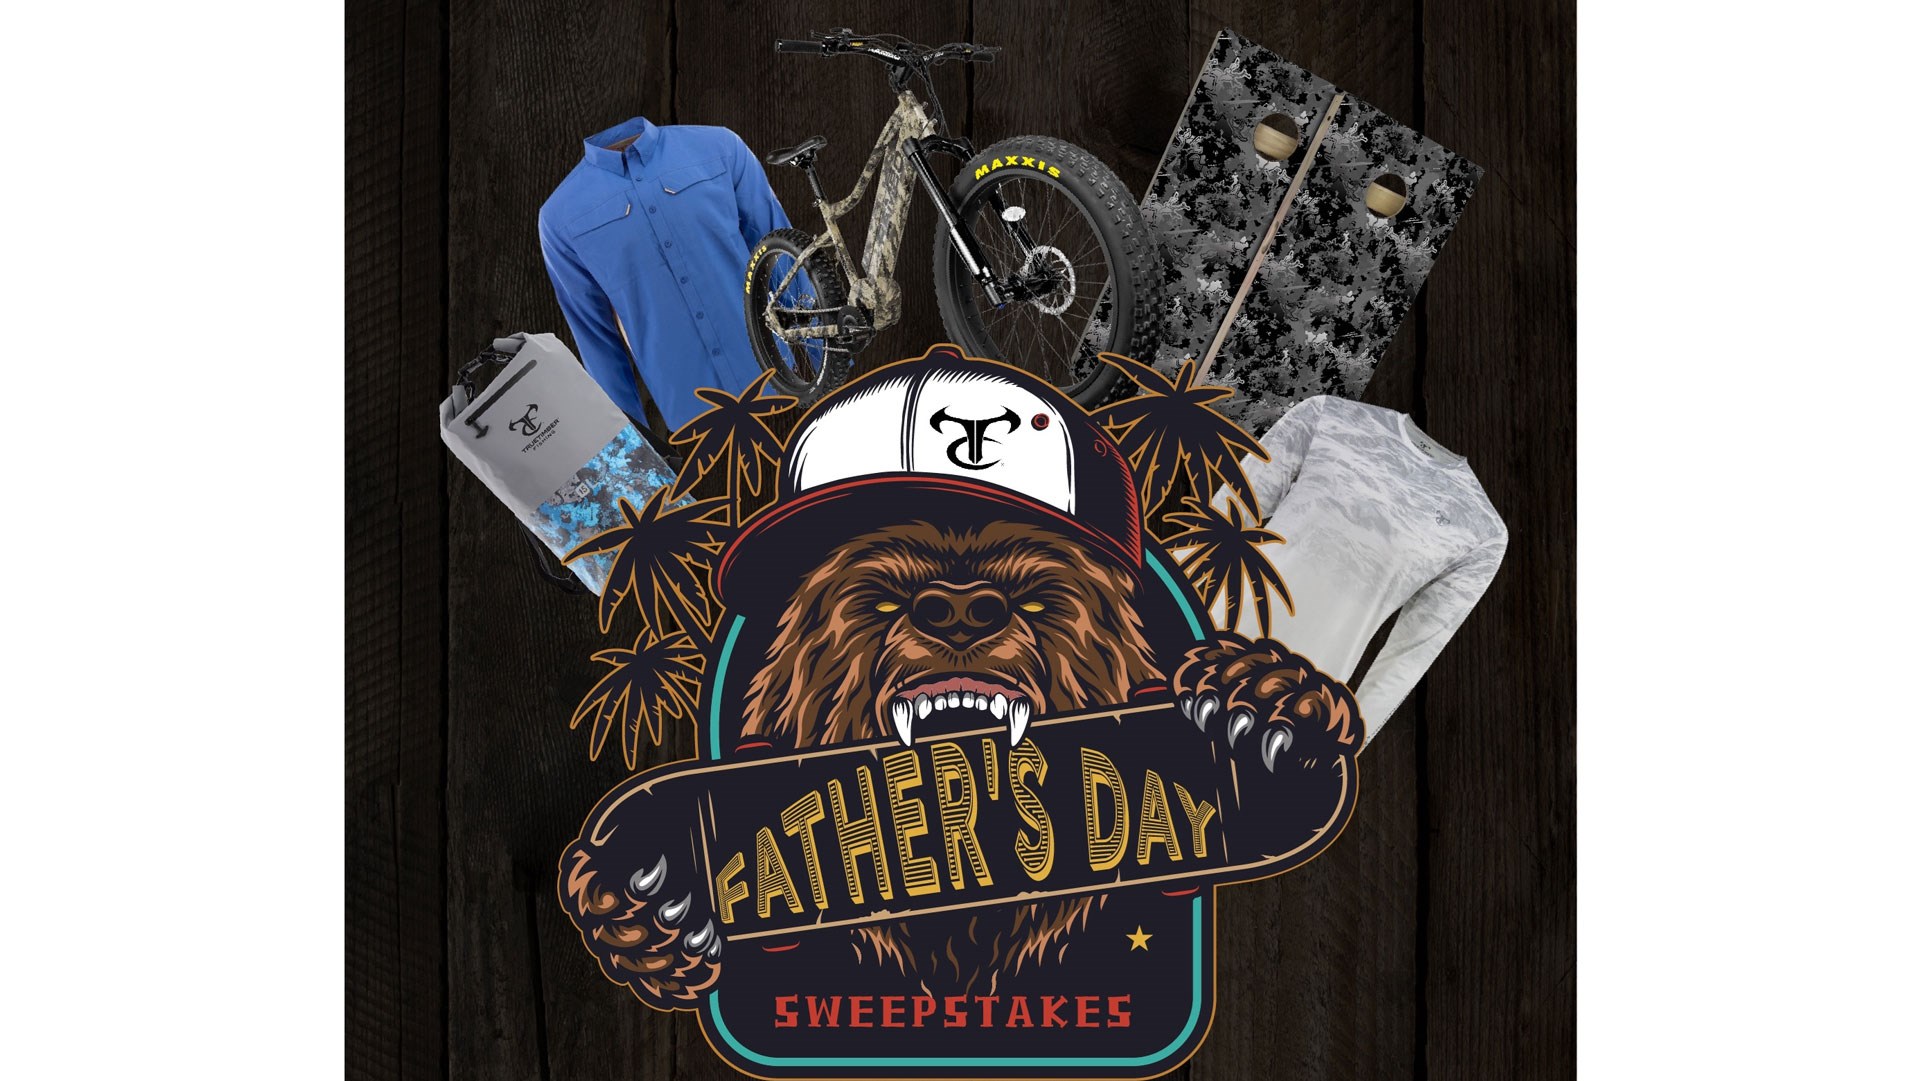 Father's Day Sweepstakes from TrueTimber